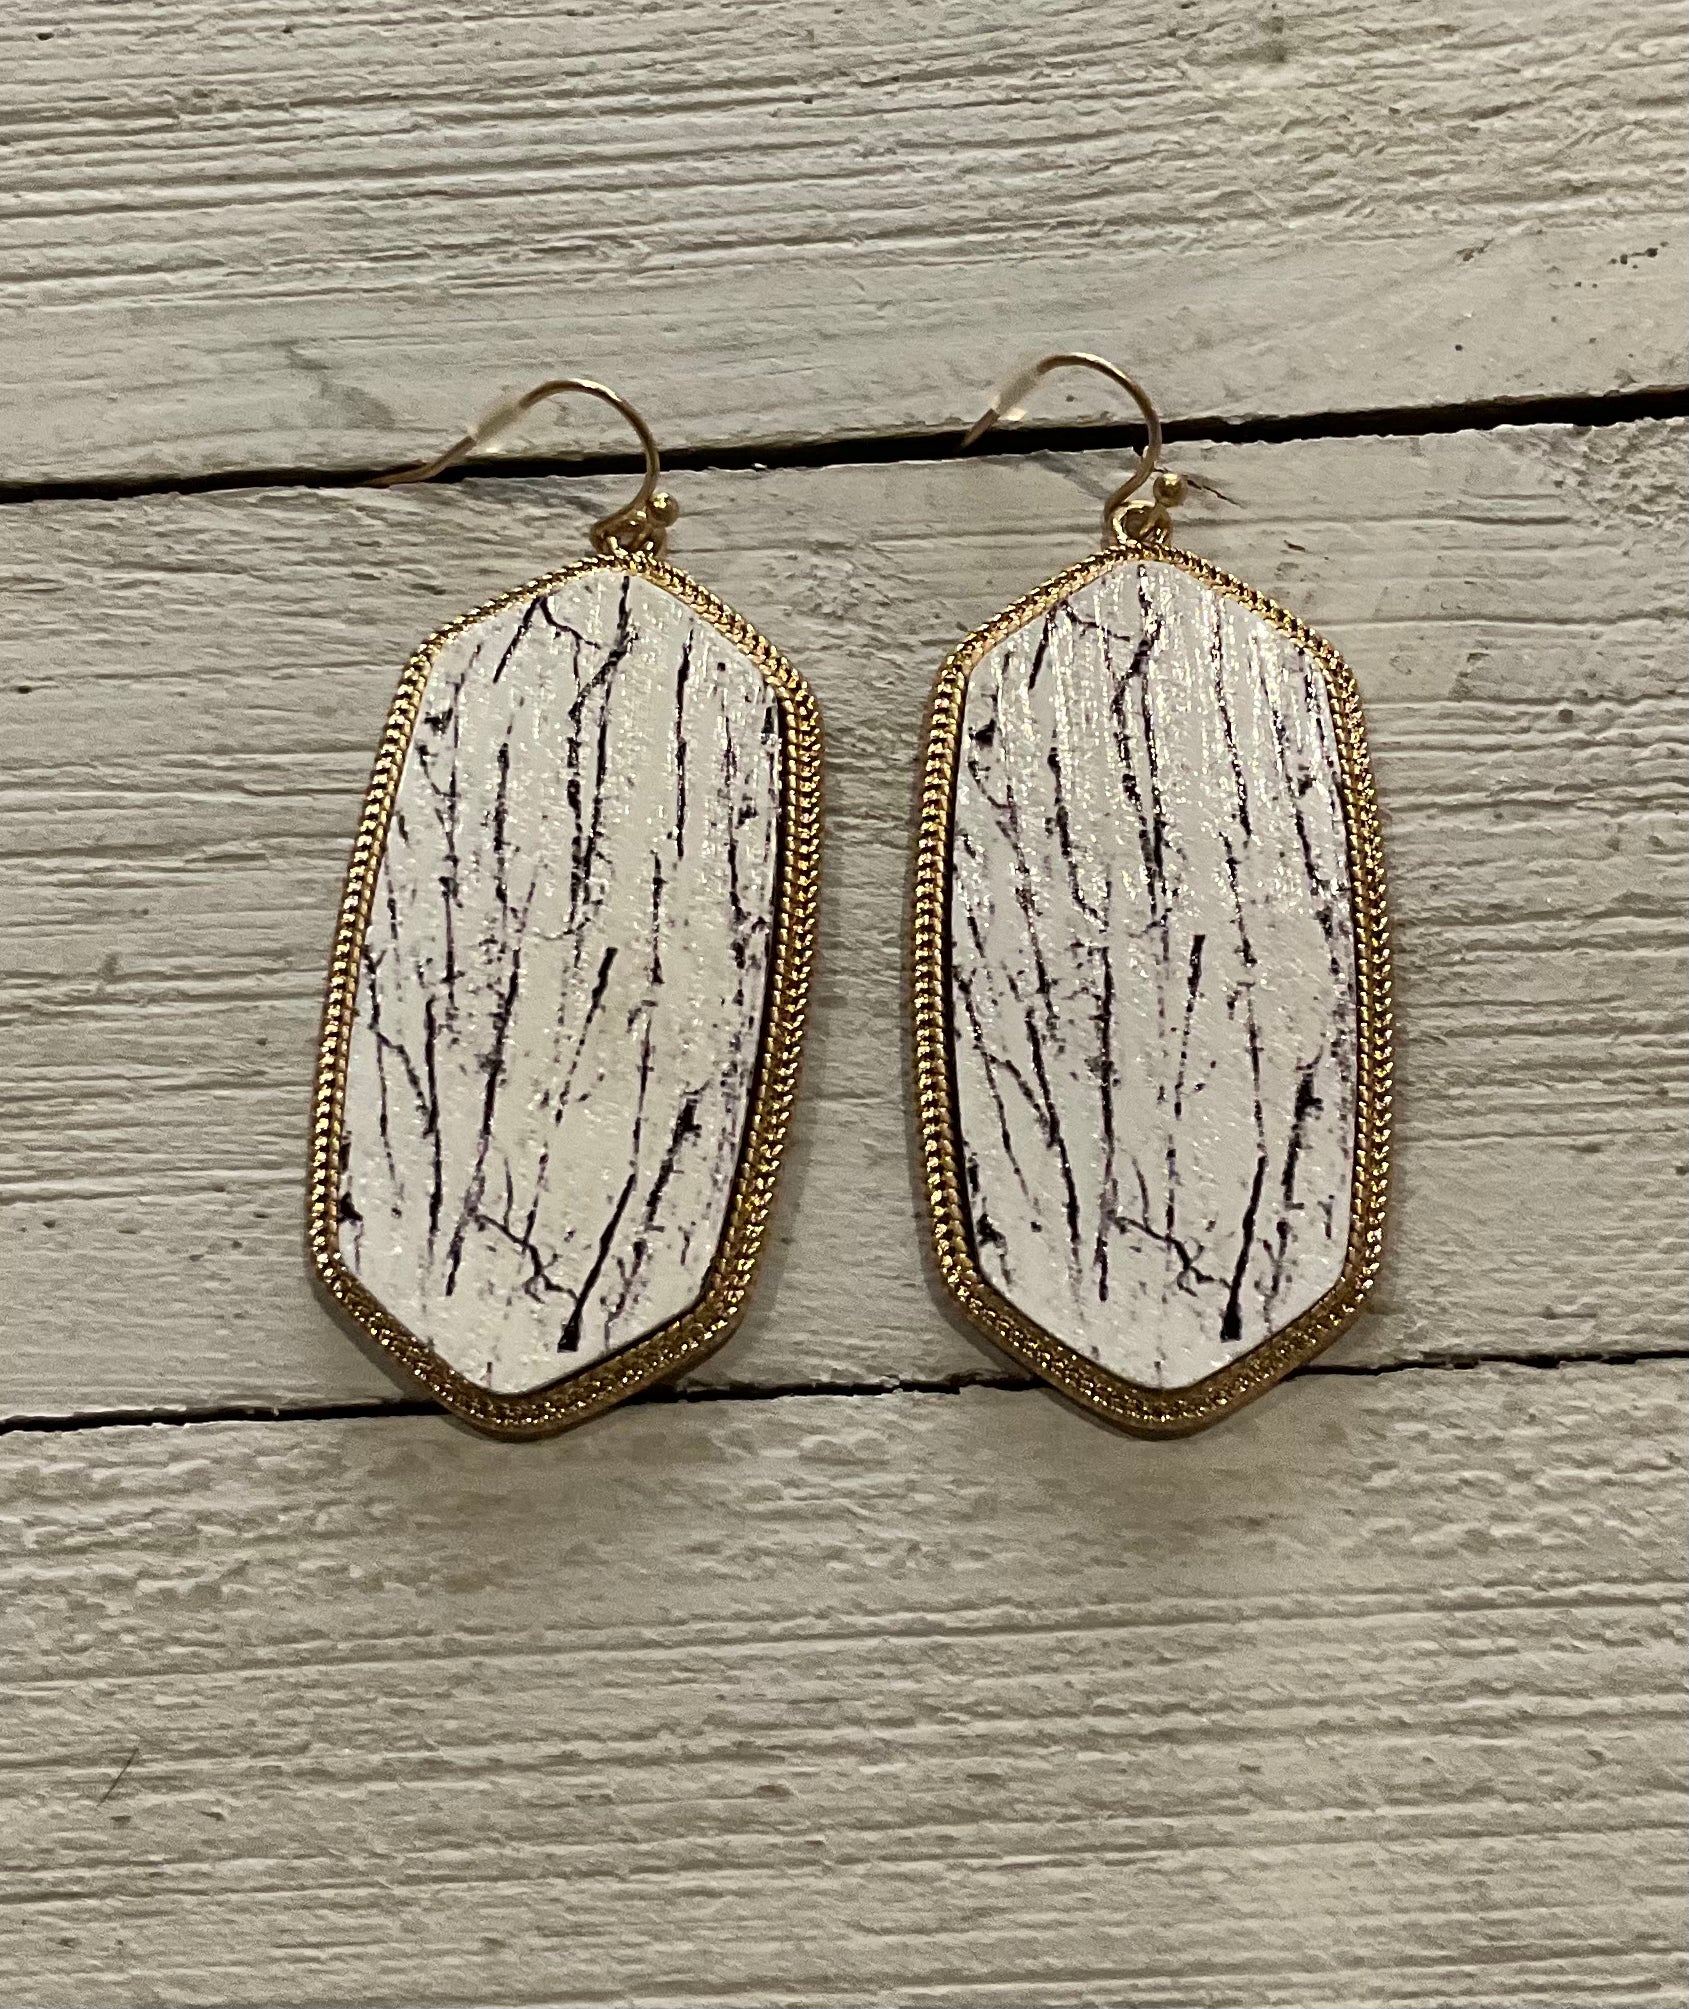 Into the White Wilderness Earrings